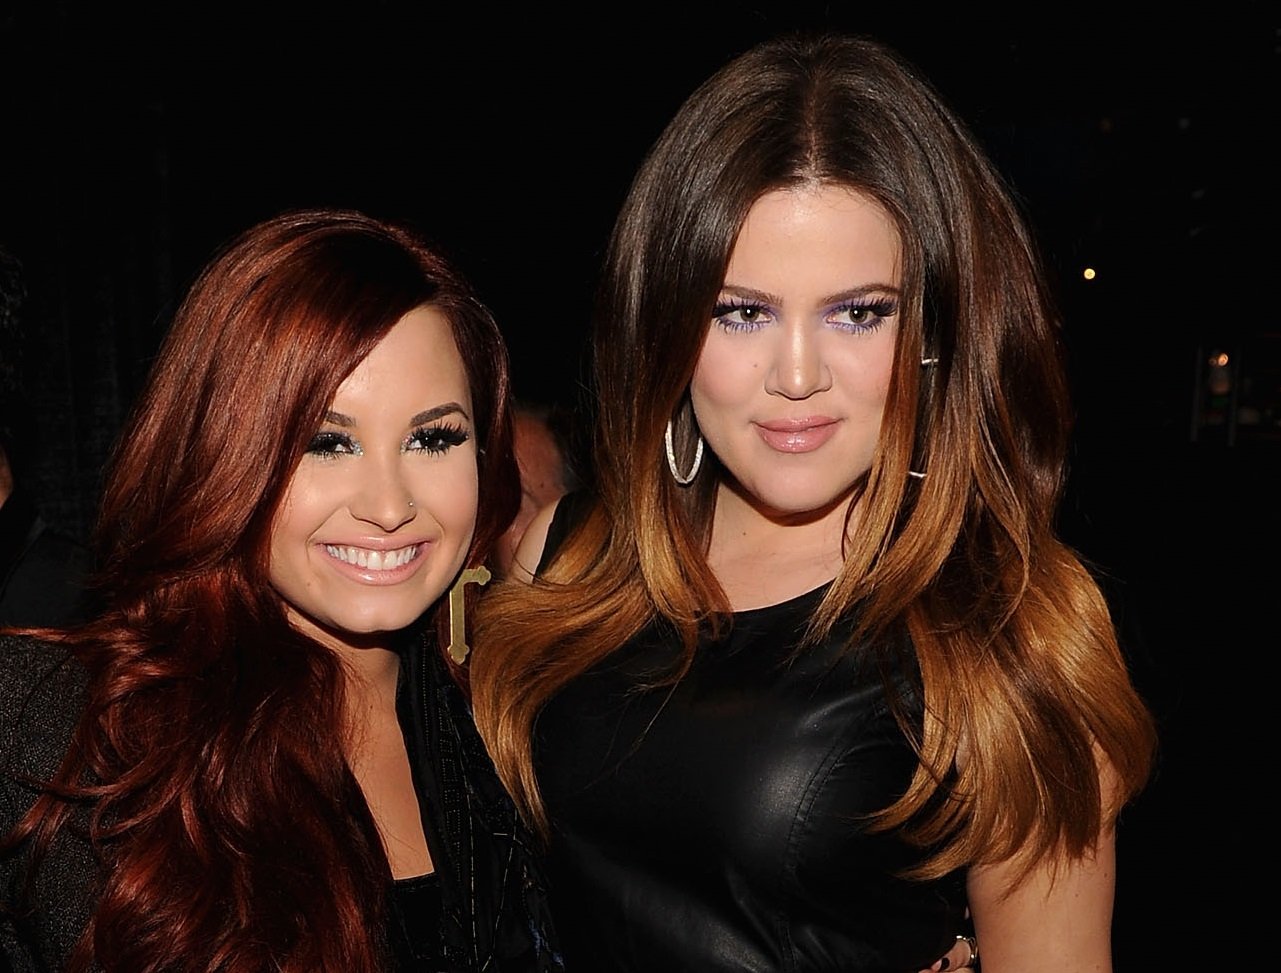 (L-R) Demi Lovato and Khloe Kardashian pose backstage at Z100's Jingle Ball 2011, presented by Aeropostale, at Madison Square Garden on December 9, 2011 in New York City. 